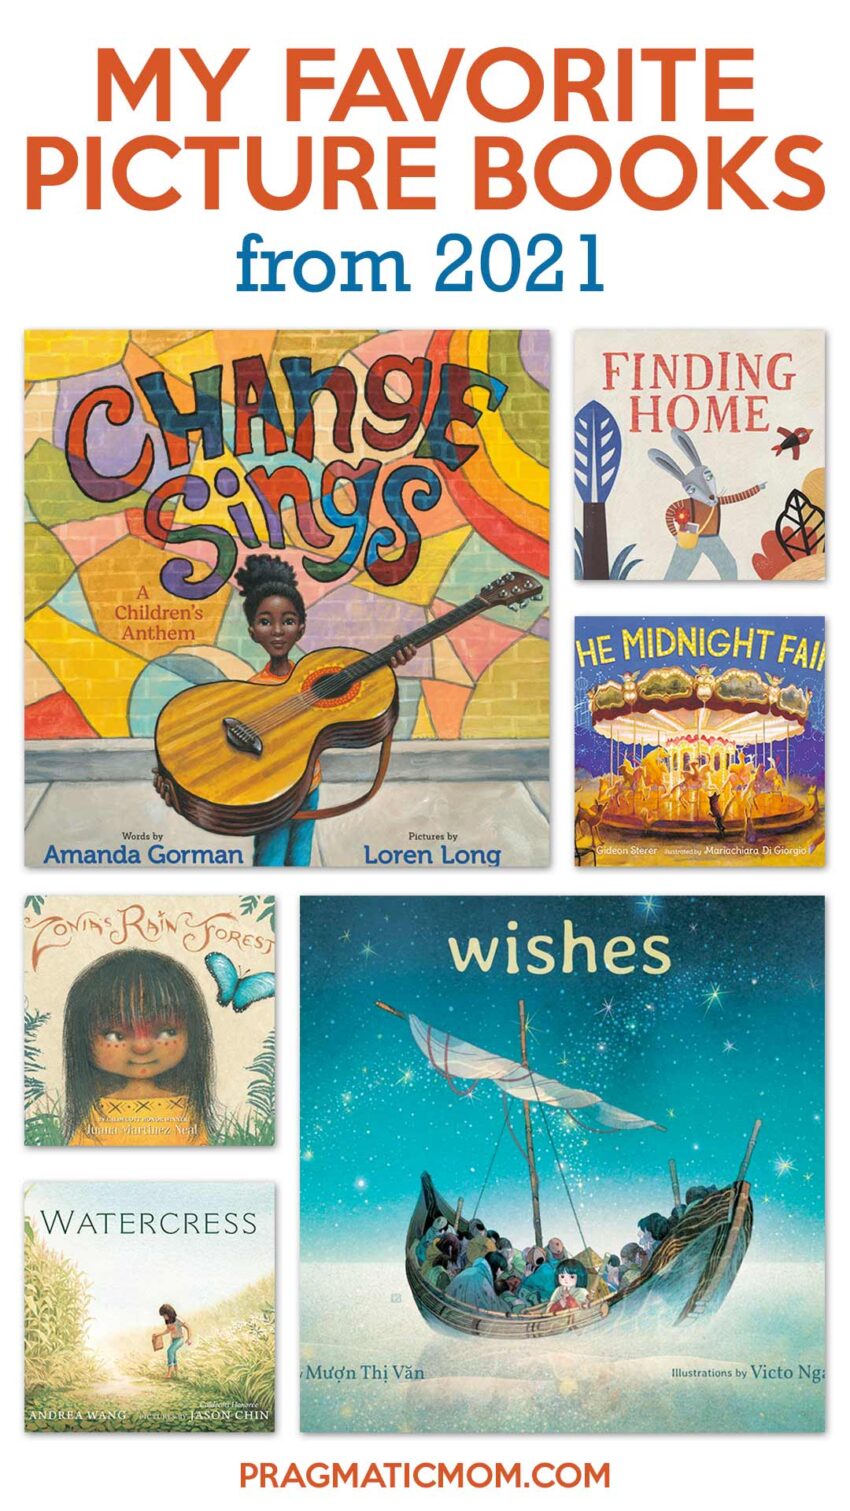 My Favorite Picture Books from 2021